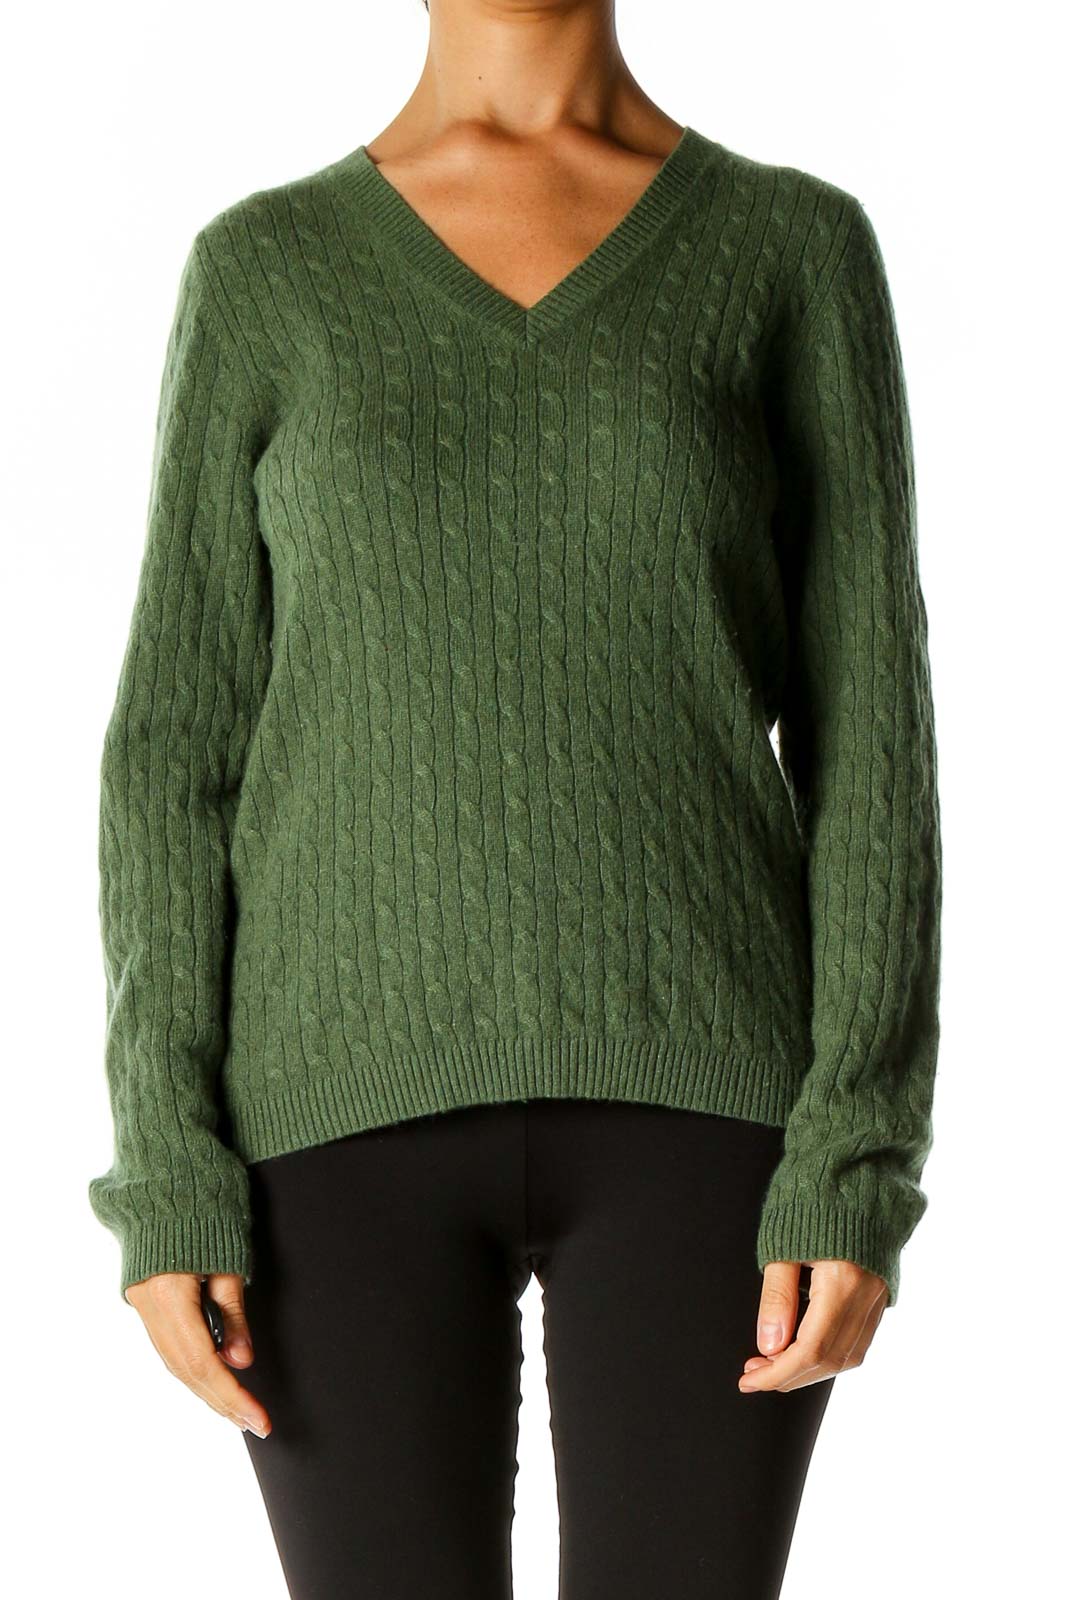 Green Textured Casual Sweater Front